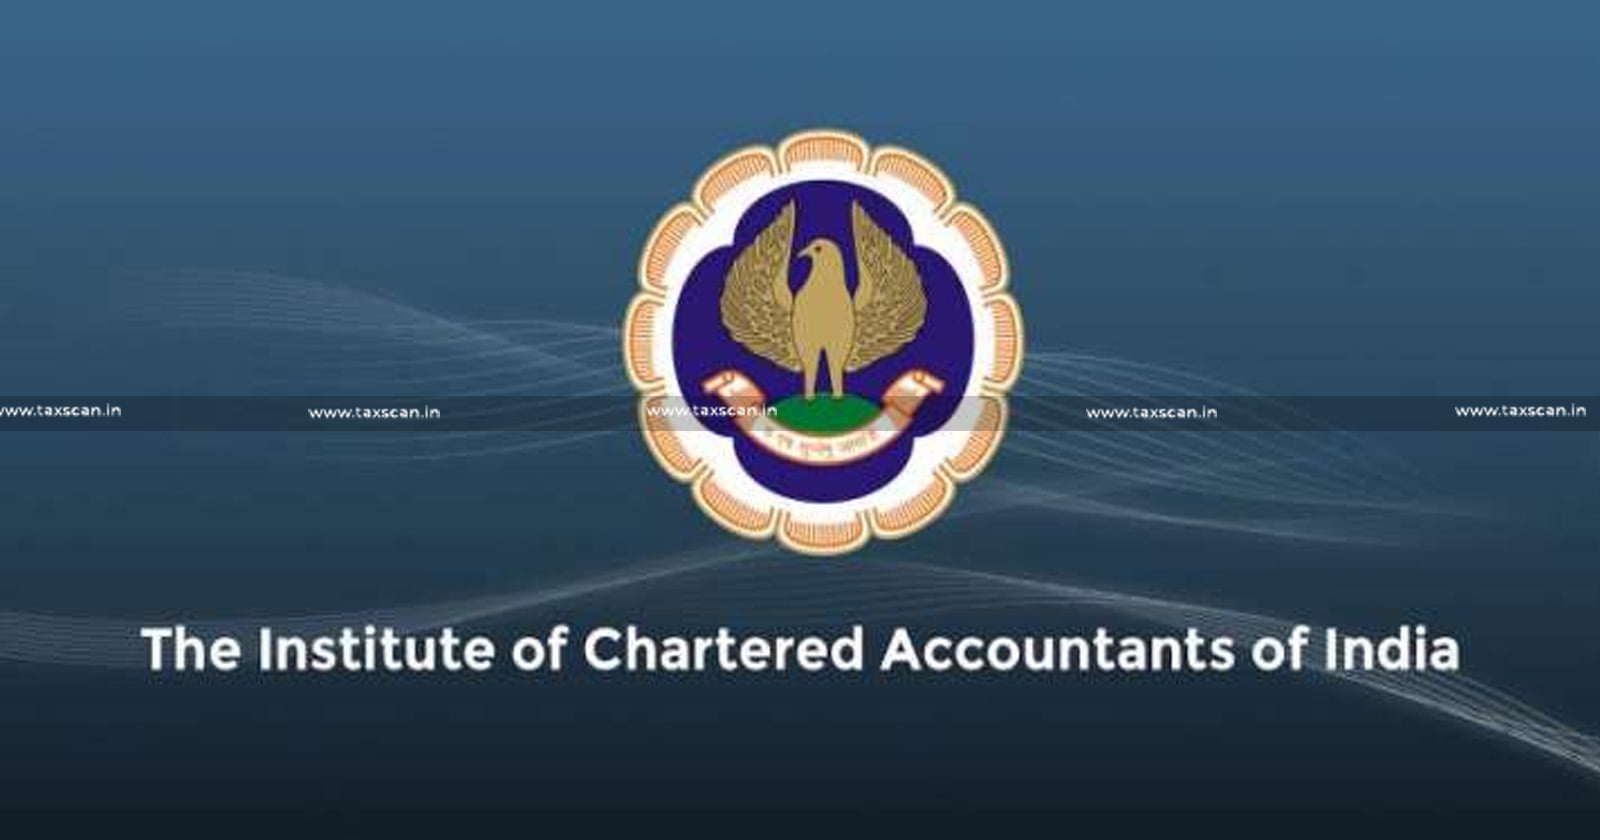 New Regulations to Tighten Disciplinary Actions - ICAI Invites Public Comments on Draft Amendments in Chartered Accountants Regulations - TAXSCAN